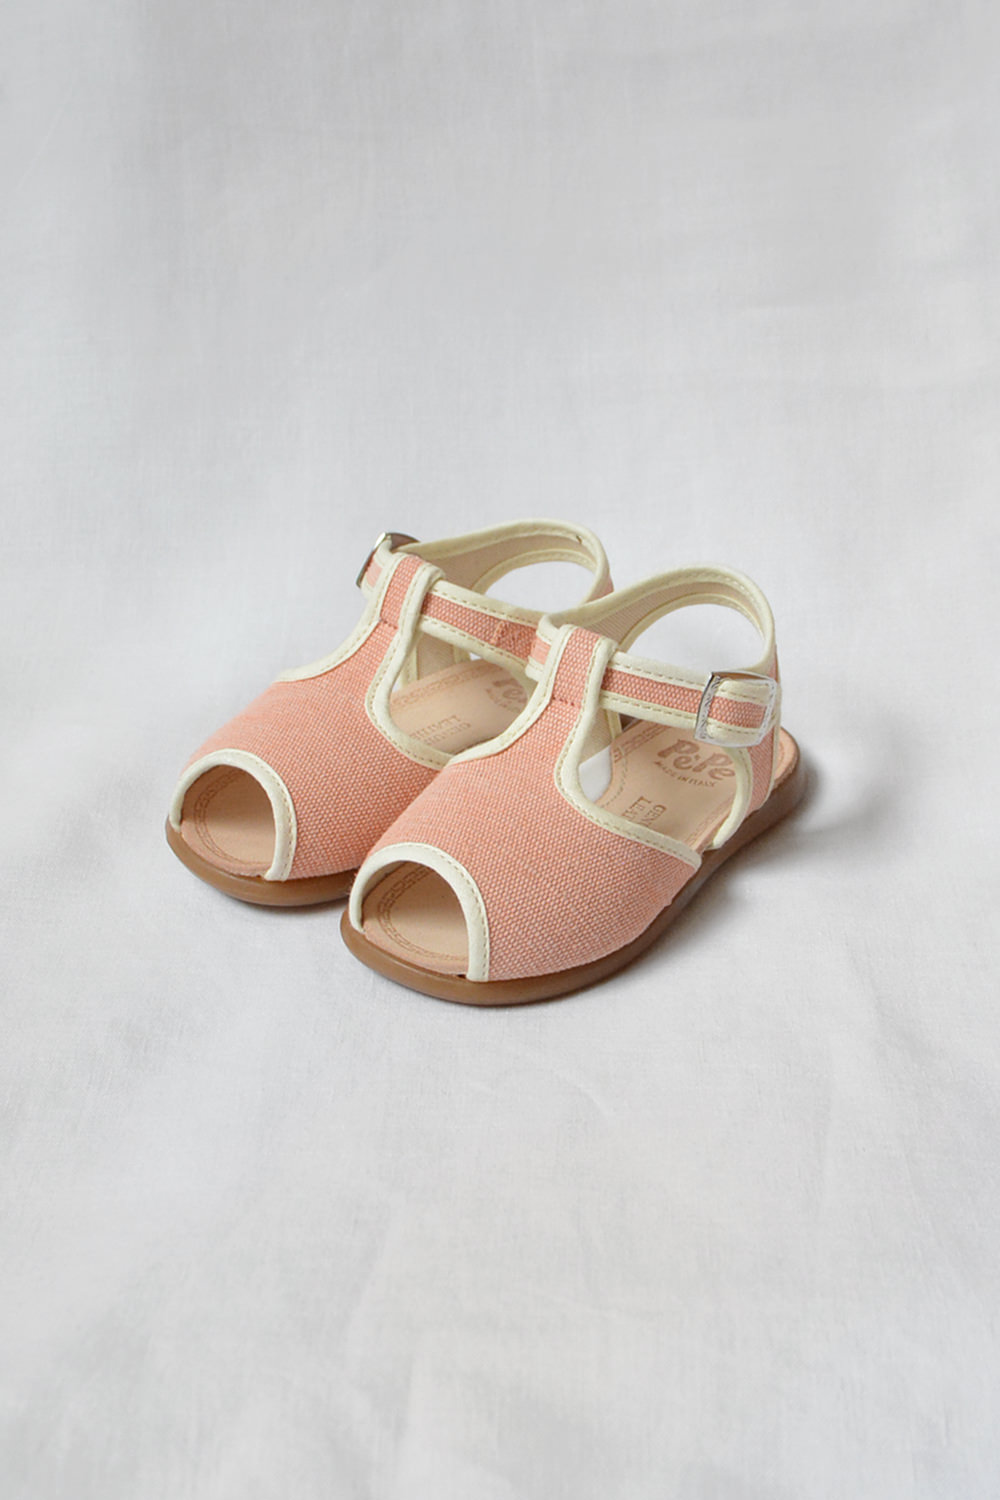 PePe Kids Sandals Gomma - Canvas with rubber sole. Pink. Main.